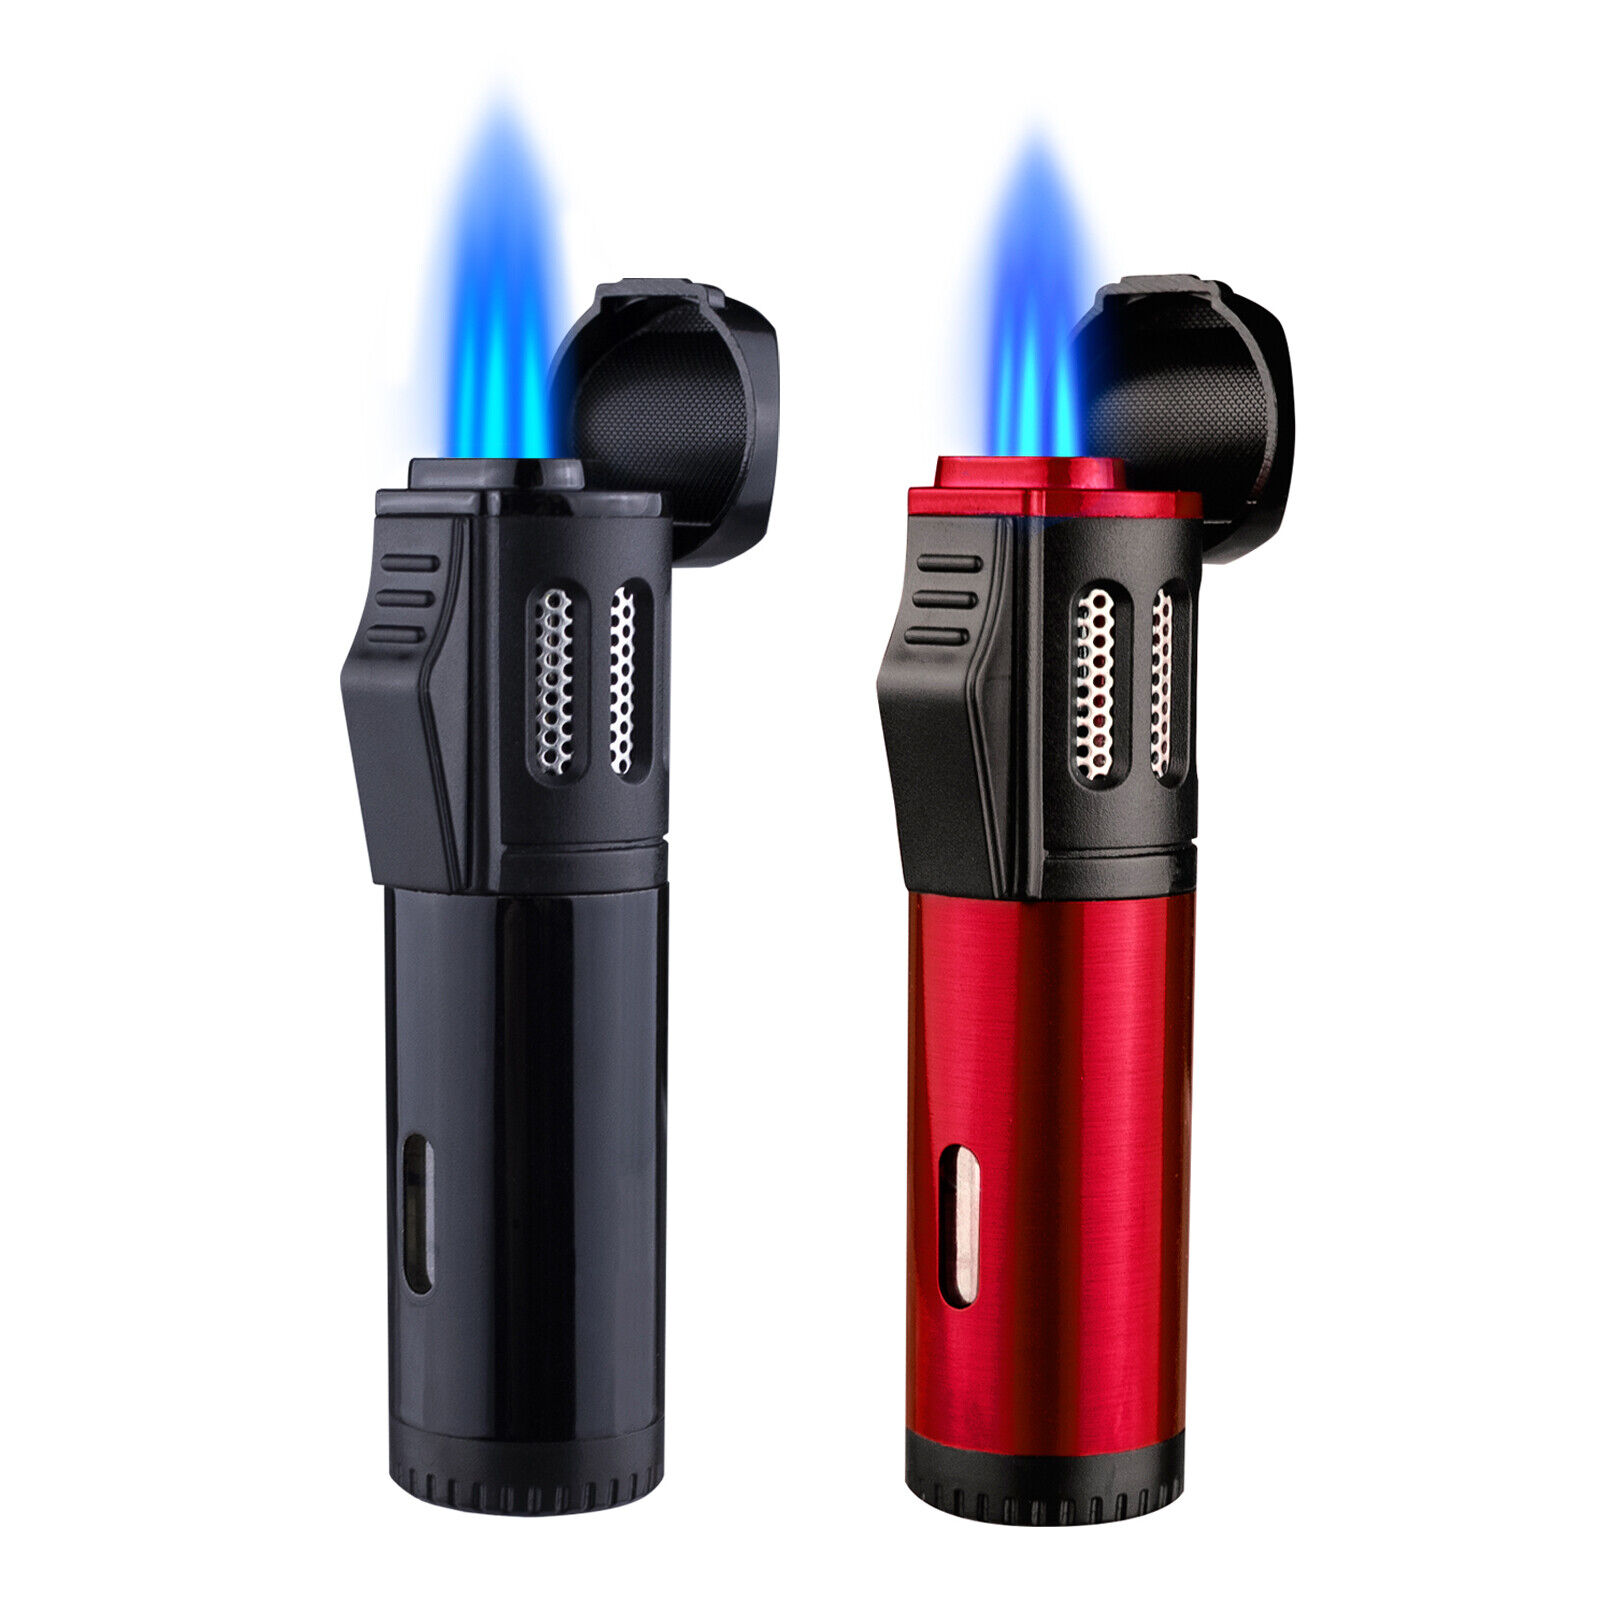 2Pcs Cigar Torch Lighters Triple Jet Flame Lighter Refillable Butane with Box